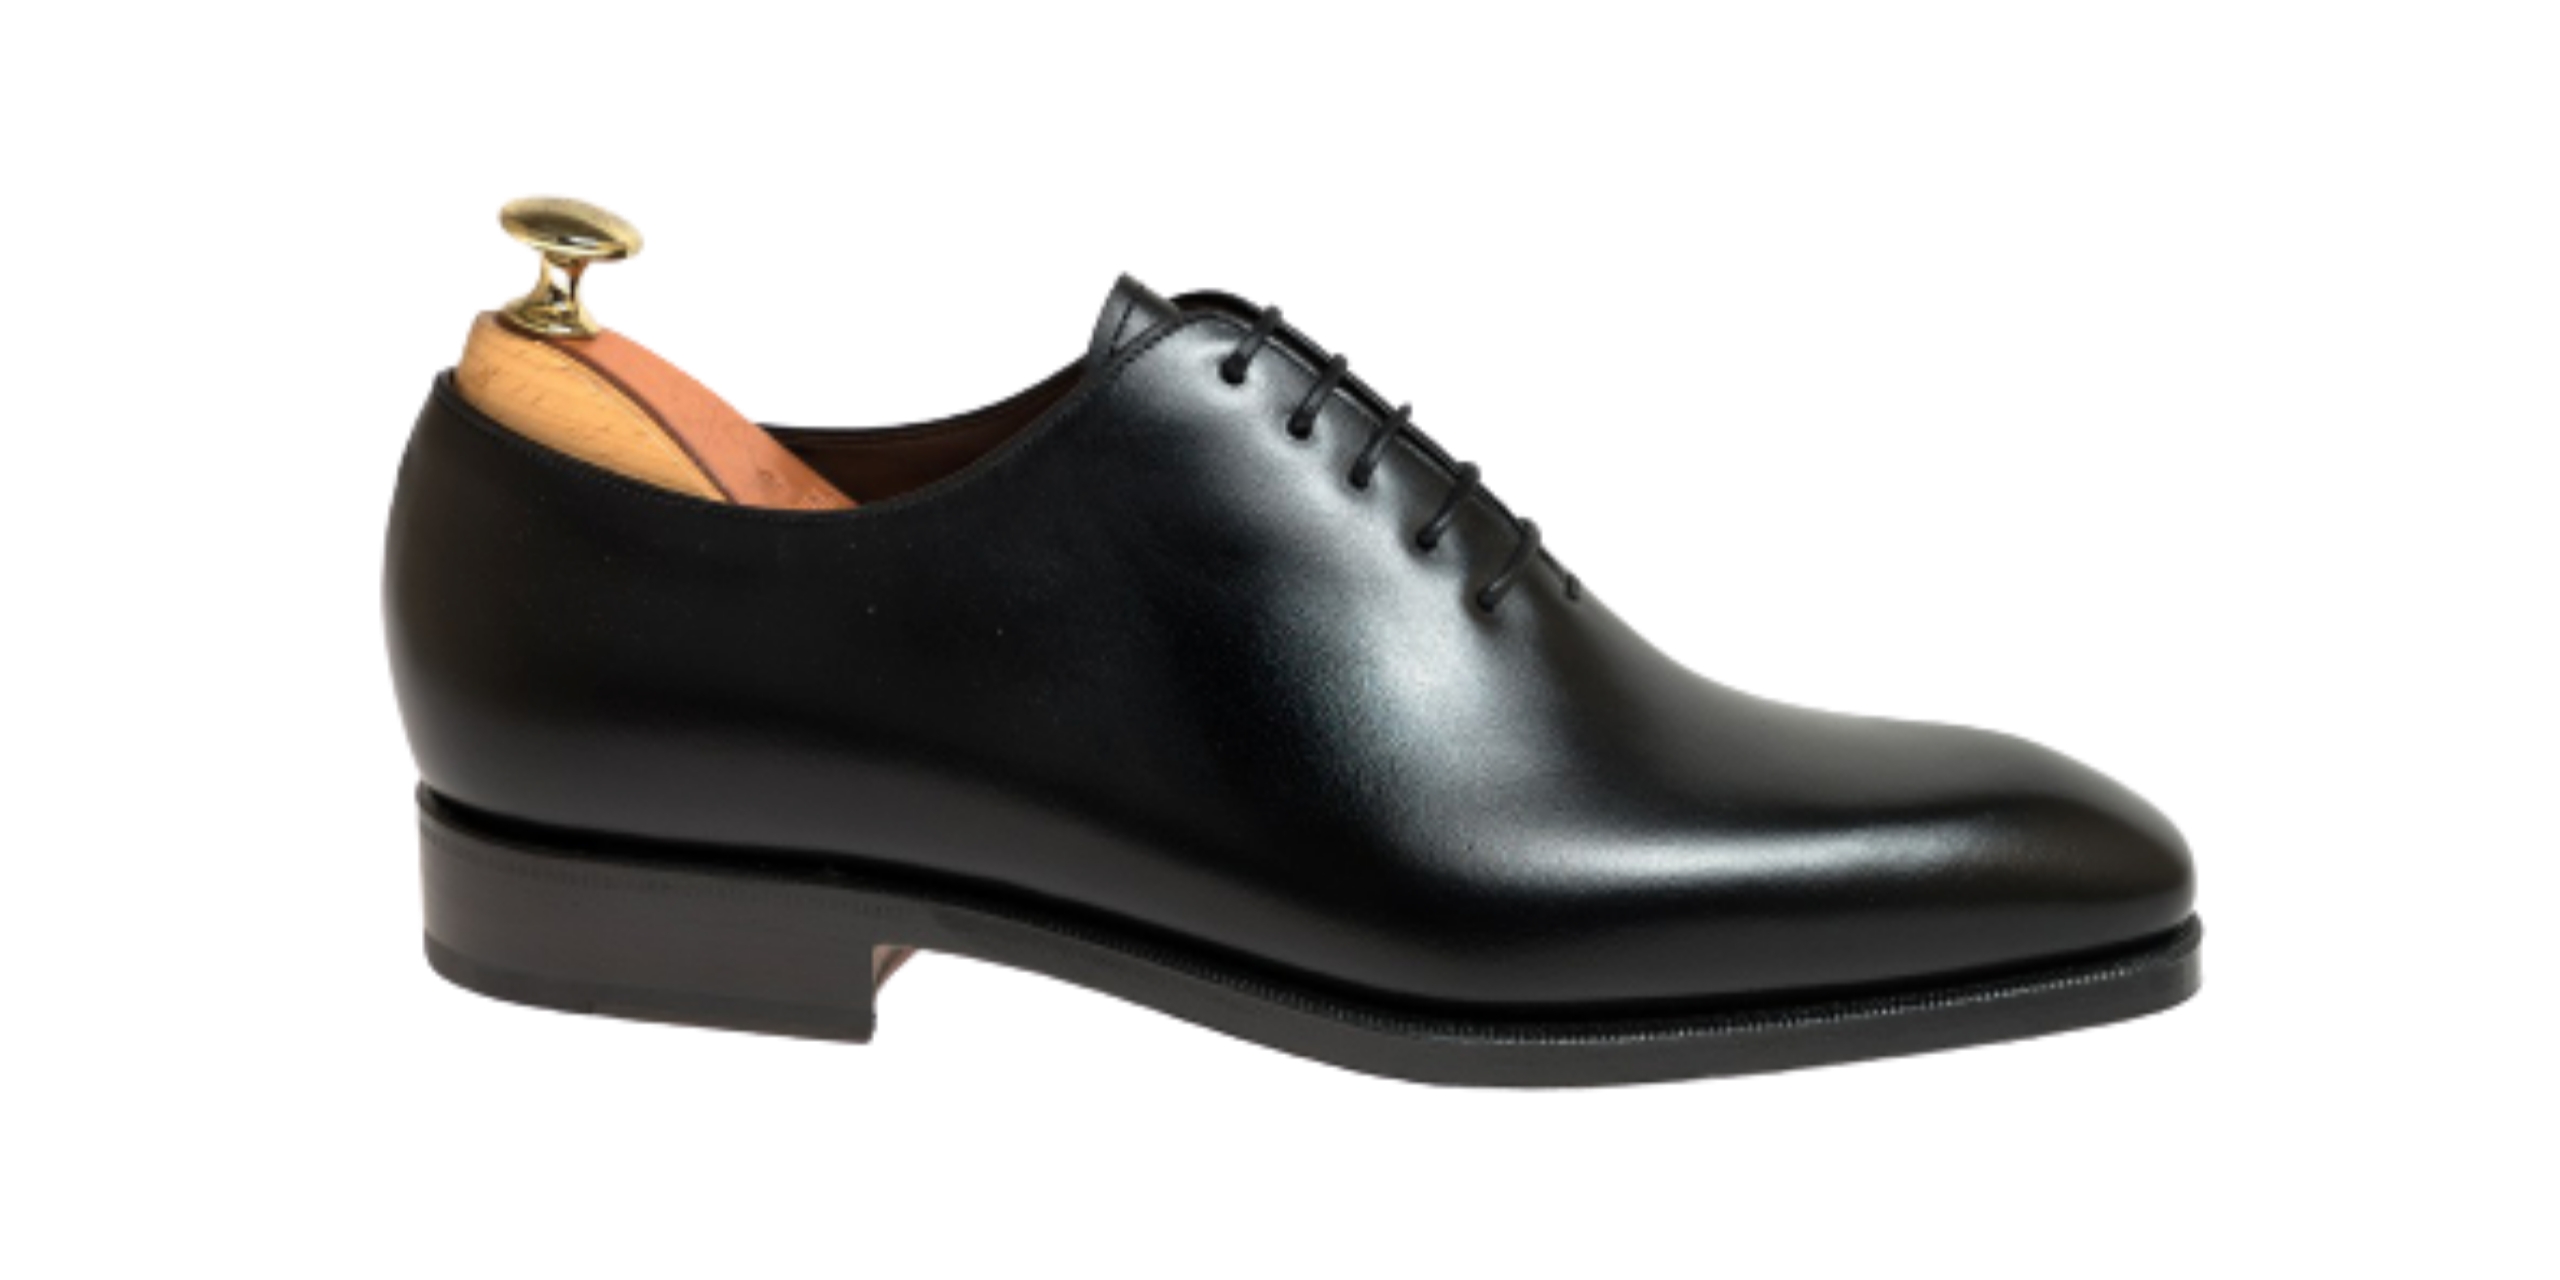 Whole cut — Types of Men's Formal Shoes